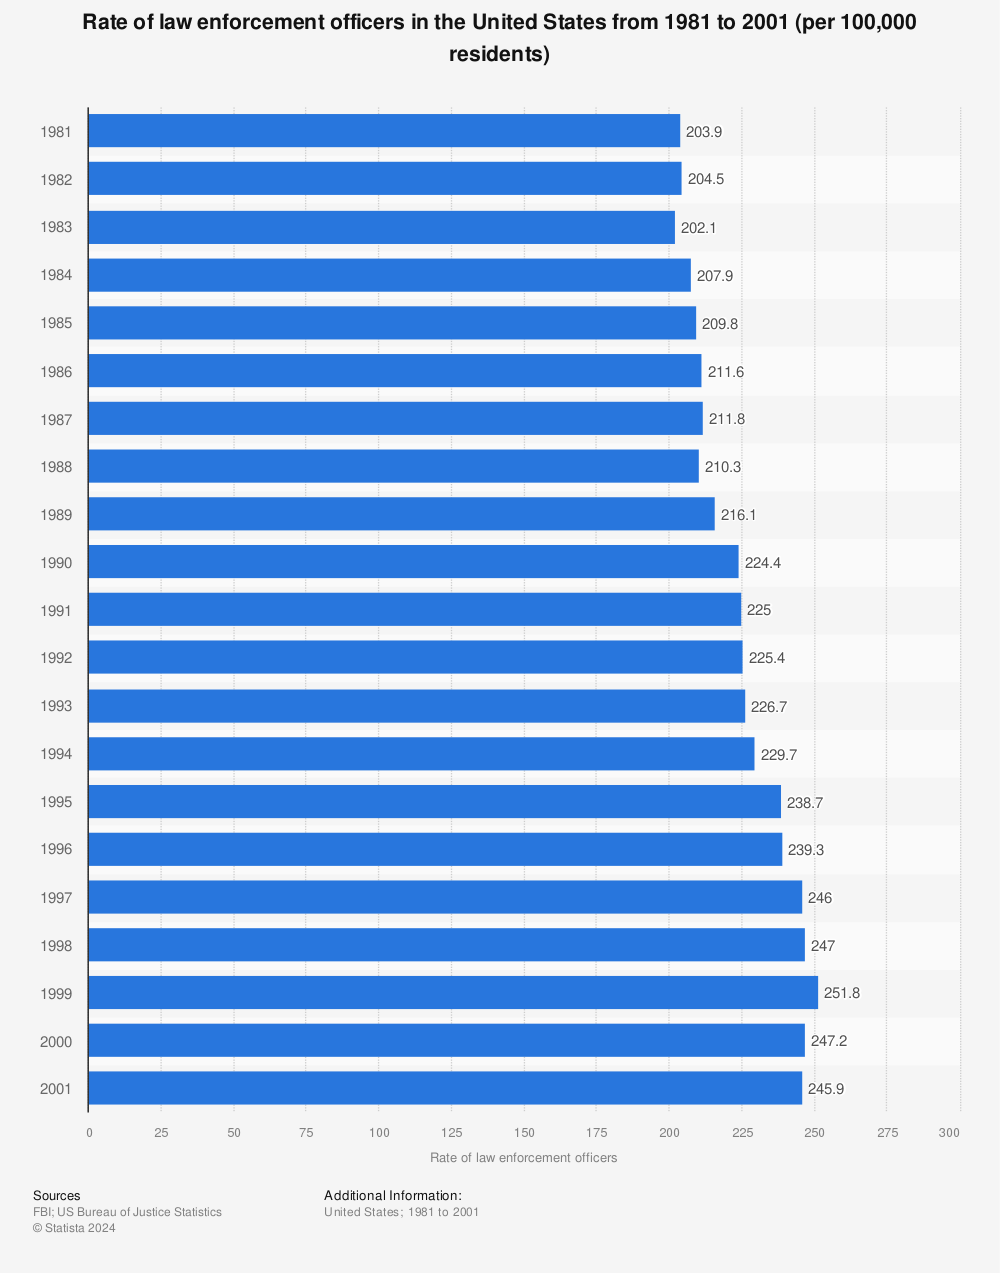 Statistic: Rate of law enforcement officers in the United States from 1981 to 2001 (per 100,000 residents) | Statista